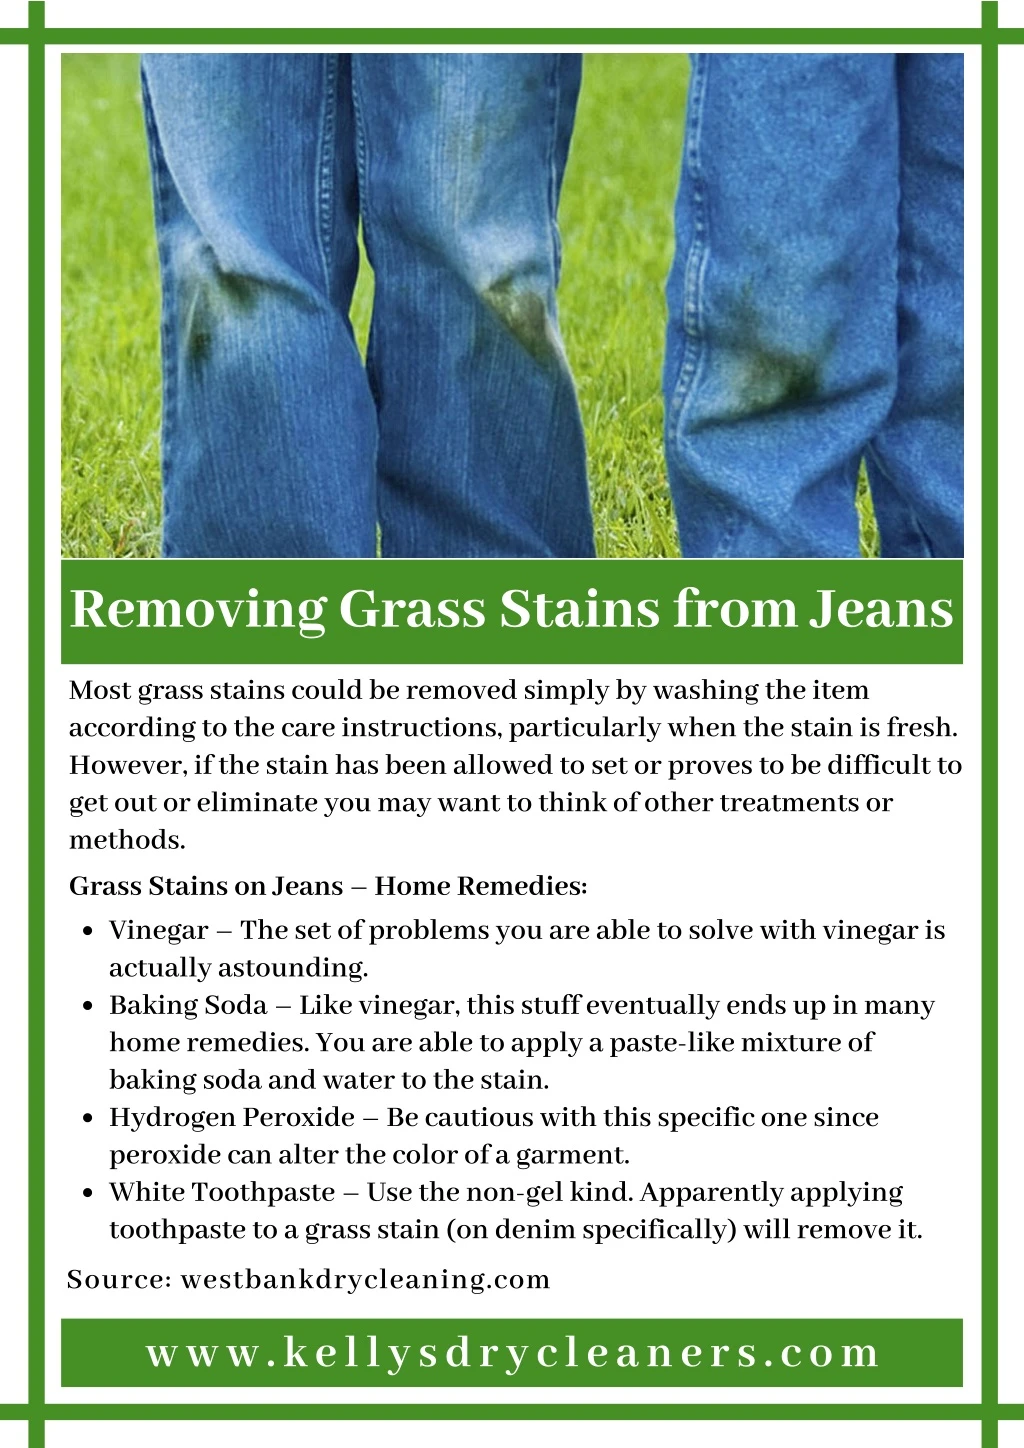 PPT - Removing Grass Stains from Jeans PowerPoint Presentation, free ...